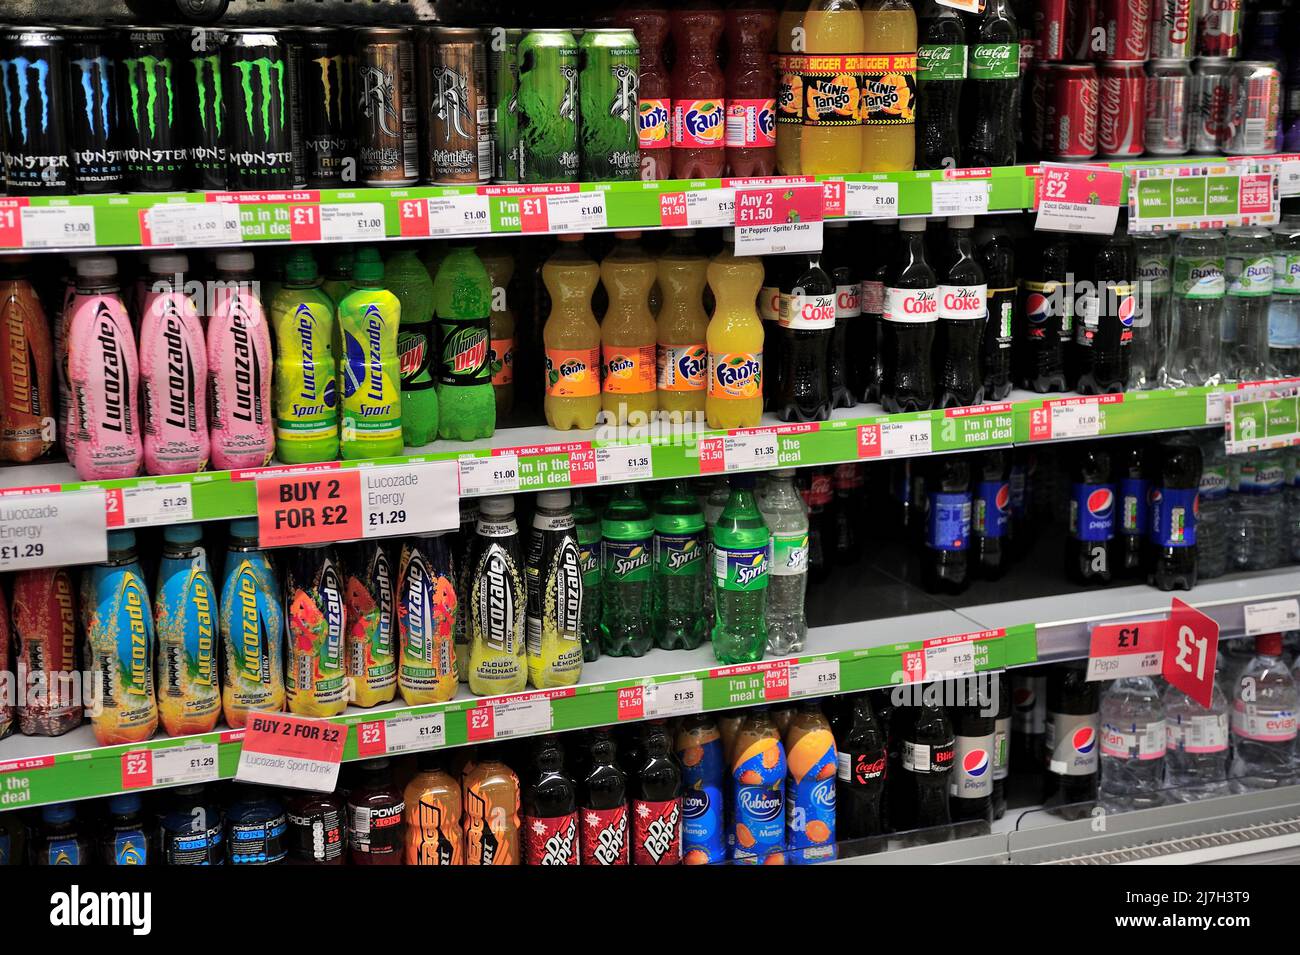 Bottles and cans of soft drinks on supermarket shelves, UK Stock Photo